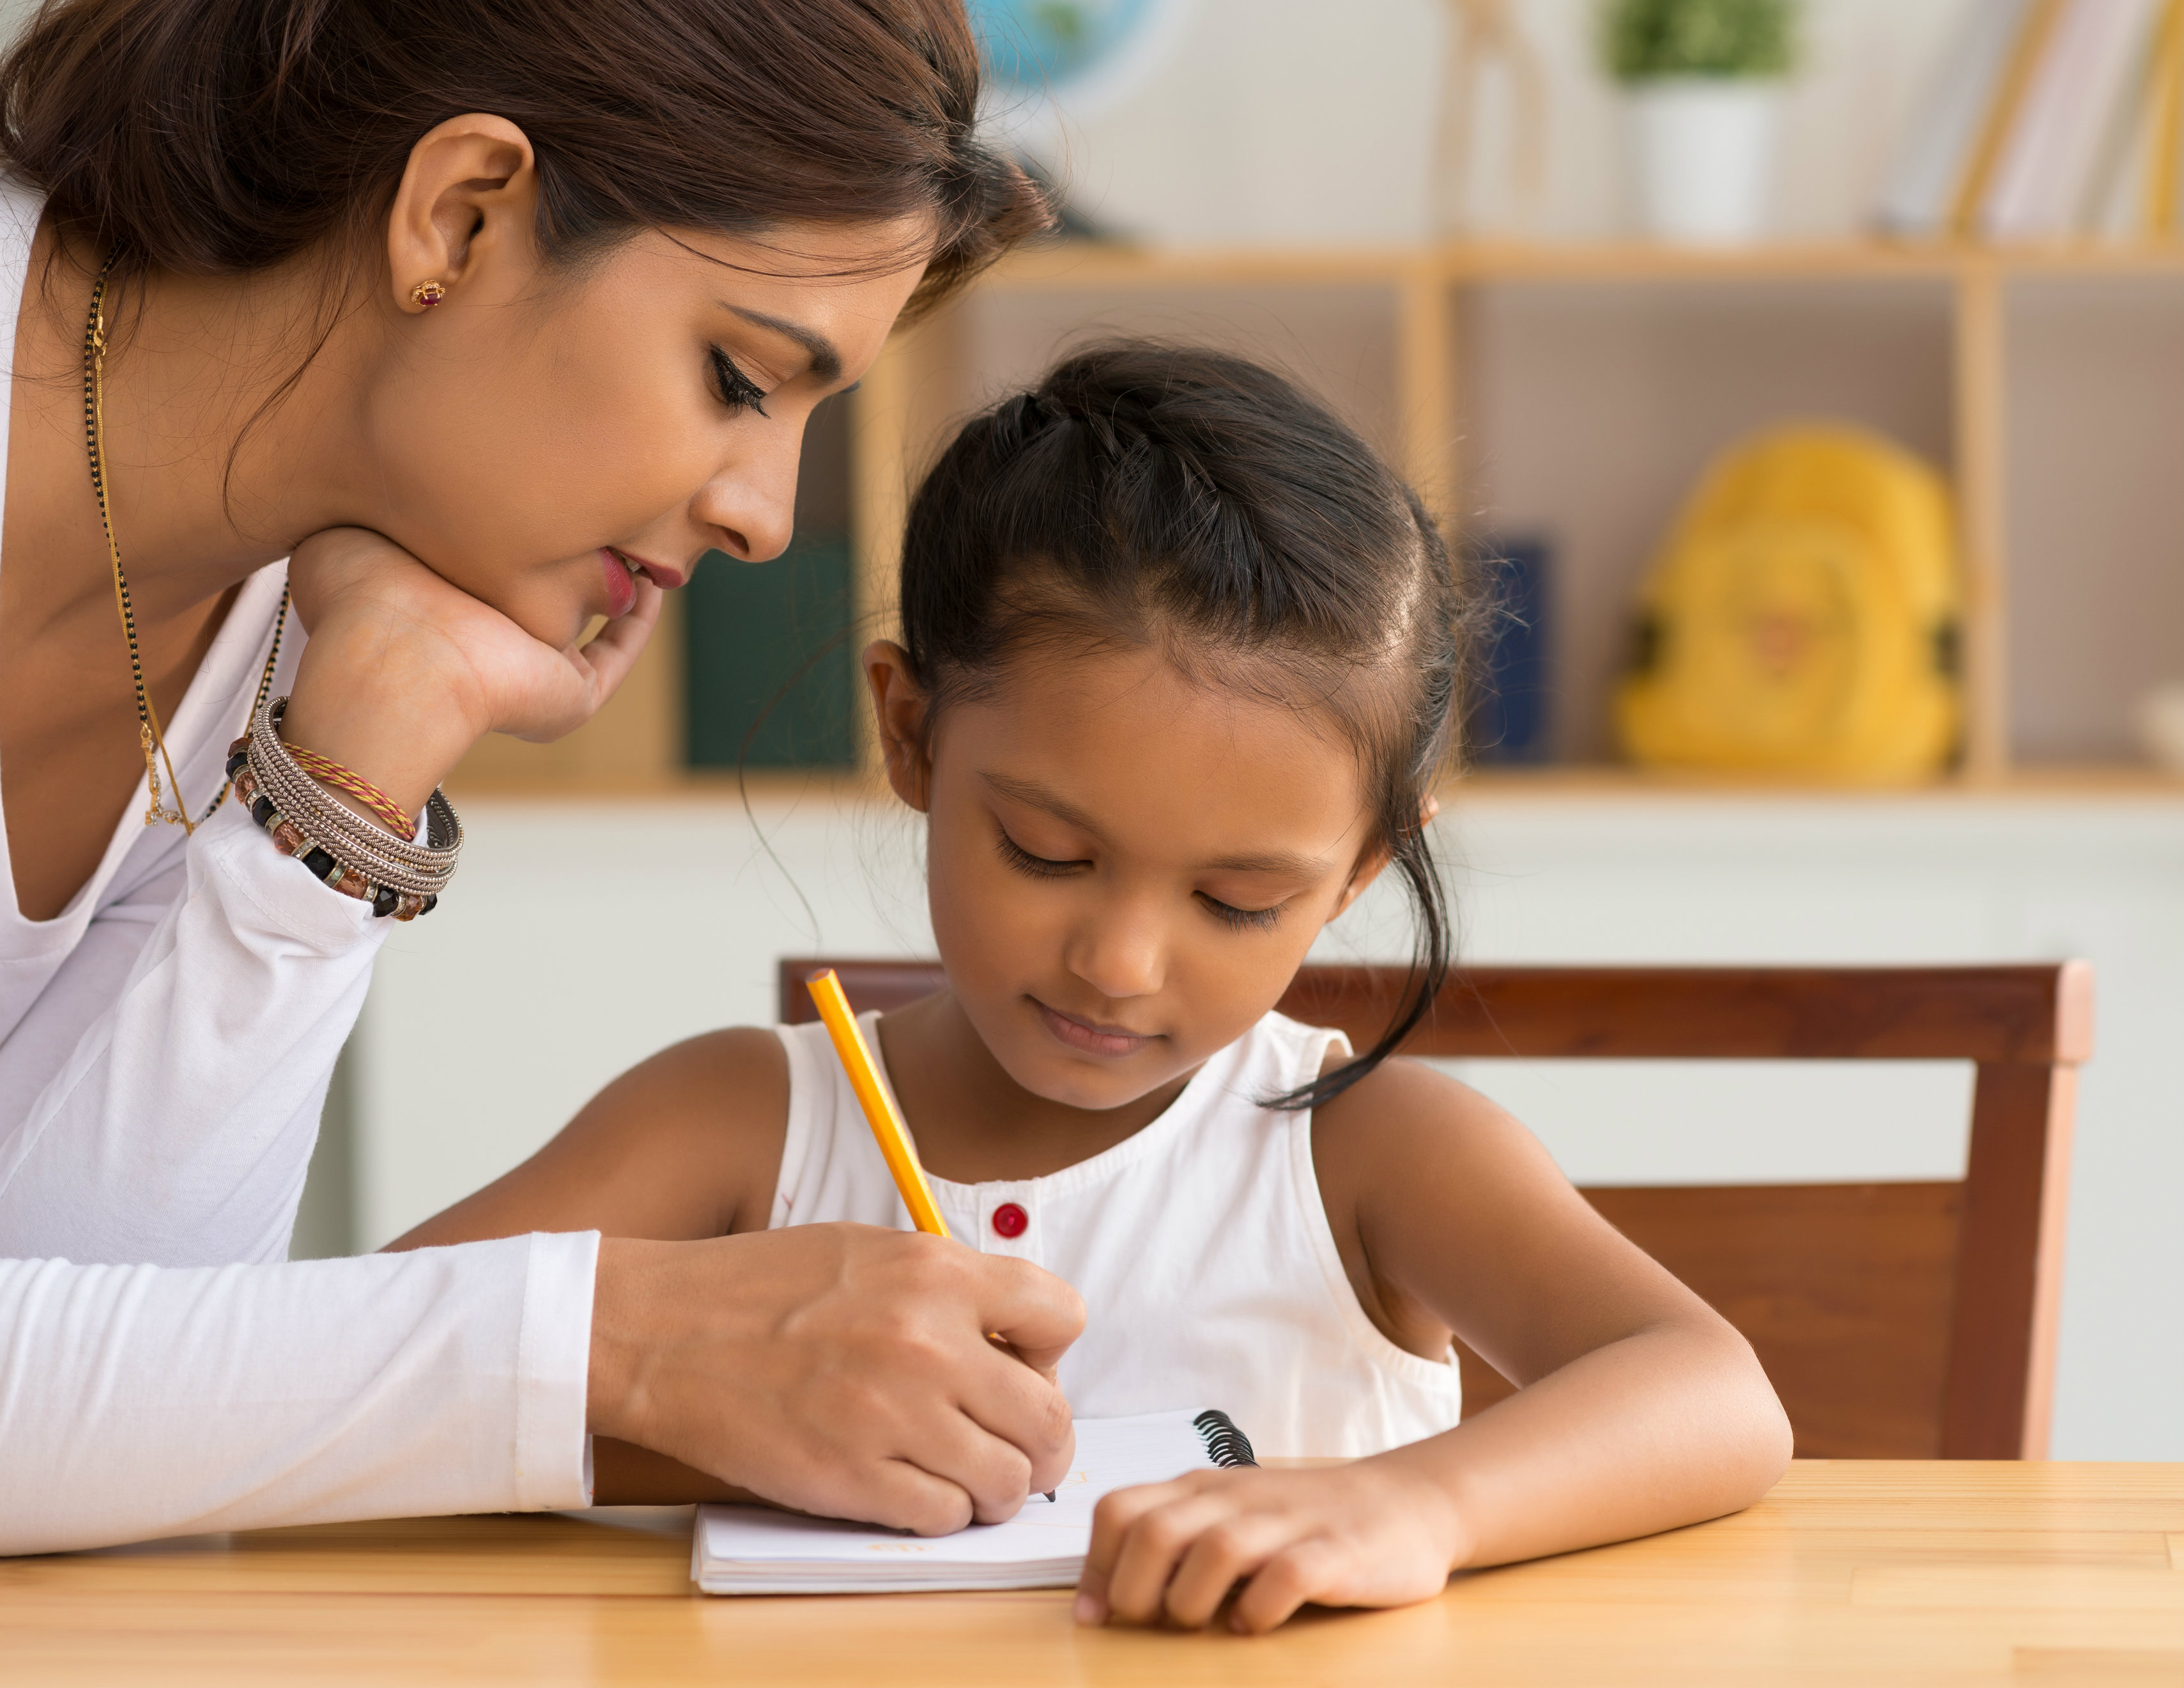 As captains, mothers alone take on the responsibilities of the household, look after the children’s education requirements and maintain order in the family.